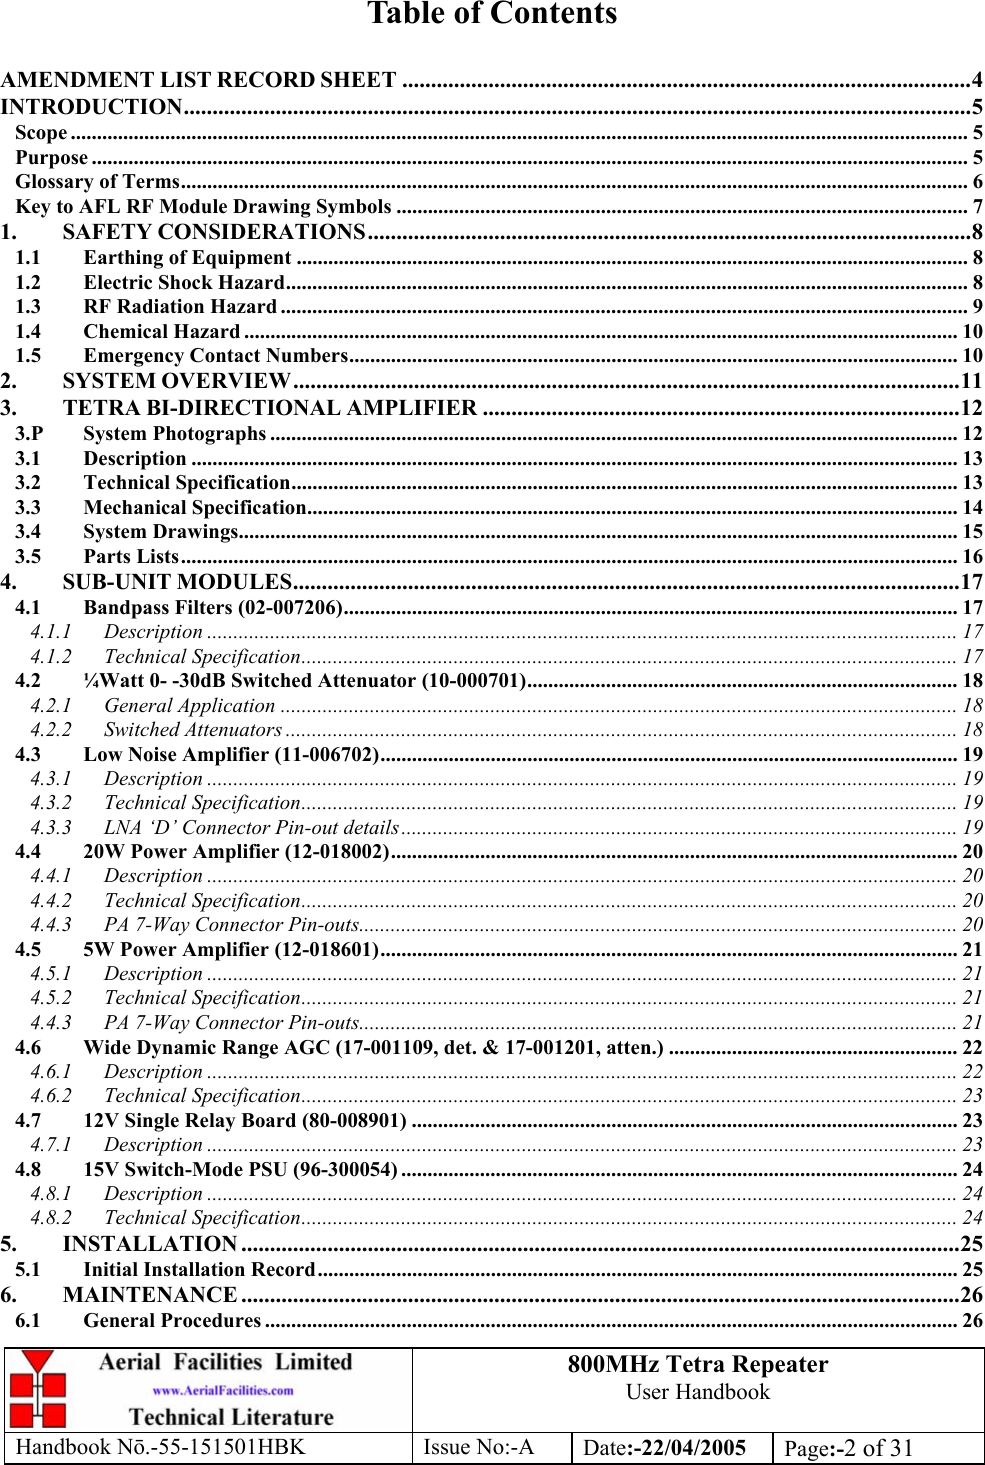 800MHz Tetra Repeater User Handbook Handbook Nō.-55-151501HBK Issue No:-A Date:-22/04/2005  Page:-2 of 31   Table of Contents  AMENDMENT LIST RECORD SHEET ...................................................................................................4 INTRODUCTION.........................................................................................................................................5 Scope ........................................................................................................................................................................... 5 Purpose ....................................................................................................................................................................... 5 Glossary of Terms...................................................................................................................................................... 6 Key to AFL RF Module Drawing Symbols ............................................................................................................. 7 1. SAFETY CONSIDERATIONS.........................................................................................................8 1.1 Earthing of Equipment ................................................................................................................................ 8 1.2 Electric Shock Hazard.................................................................................................................................. 8 1.3 RF Radiation Hazard ................................................................................................................................... 9 1.4 Chemical Hazard ........................................................................................................................................ 10 1.5 Emergency Contact Numbers.................................................................................................................... 10 2. SYSTEM OVERVIEW....................................................................................................................11 3. TETRA BI-DIRECTIONAL AMPLIFIER ...................................................................................12 3.P System Photographs ................................................................................................................................... 12 3.1 Description .................................................................................................................................................. 13 3.2 Technical Specification............................................................................................................................... 13 3.3 Mechanical Specification............................................................................................................................ 14 3.4 System Drawings......................................................................................................................................... 15 3.5 Parts Lists.................................................................................................................................................... 16 4. SUB-UNIT MODULES....................................................................................................................17 4.1 Bandpass Filters (02-007206)..................................................................................................................... 17 4.1.1 Description ............................................................................................................................................... 17 4.1.2 Technical Specification............................................................................................................................. 17 4.2 ¼Watt 0- -30dB Switched Attenuator (10-000701)..................................................................................18 4.2.1 General Application ................................................................................................................................. 18 4.2.2 Switched Attenuators ................................................................................................................................ 18 4.3 Low Noise Amplifier (11-006702).............................................................................................................. 19 4.3.1 Description ............................................................................................................................................... 19 4.3.2 Technical Specification............................................................................................................................. 19 4.3.3 LNA ‘D’ Connector Pin-out details.......................................................................................................... 19 4.4 20W Power Amplifier (12-018002)............................................................................................................ 20 4.4.1 Description ............................................................................................................................................... 20 4.4.2 Technical Specification............................................................................................................................. 20 4.4.3 PA 7-Way Connector Pin-outs.................................................................................................................. 20 4.5 5W Power Amplifier (12-018601).............................................................................................................. 21 4.5.1 Description ............................................................................................................................................... 21 4.5.2 Technical Specification............................................................................................................................. 21 4.4.3 PA 7-Way Connector Pin-outs.................................................................................................................. 21 4.6 Wide Dynamic Range AGC (17-001109, det. &amp; 17-001201, atten.) ....................................................... 22 4.6.1 Description ............................................................................................................................................... 22 4.6.2 Technical Specification............................................................................................................................. 23 4.7 12V Single Relay Board (80-008901) ........................................................................................................ 23 4.7.1 Description ............................................................................................................................................... 23 4.8 15V Switch-Mode PSU (96-300054) .......................................................................................................... 24 4.8.1 Description ............................................................................................................................................... 24 4.8.2 Technical Specification............................................................................................................................. 24 5. INSTALLATION .............................................................................................................................25 5.1 Initial Installation Record.......................................................................................................................... 25 6. MAINTENANCE .............................................................................................................................26 6.1 General Procedures .................................................................................................................................... 26 